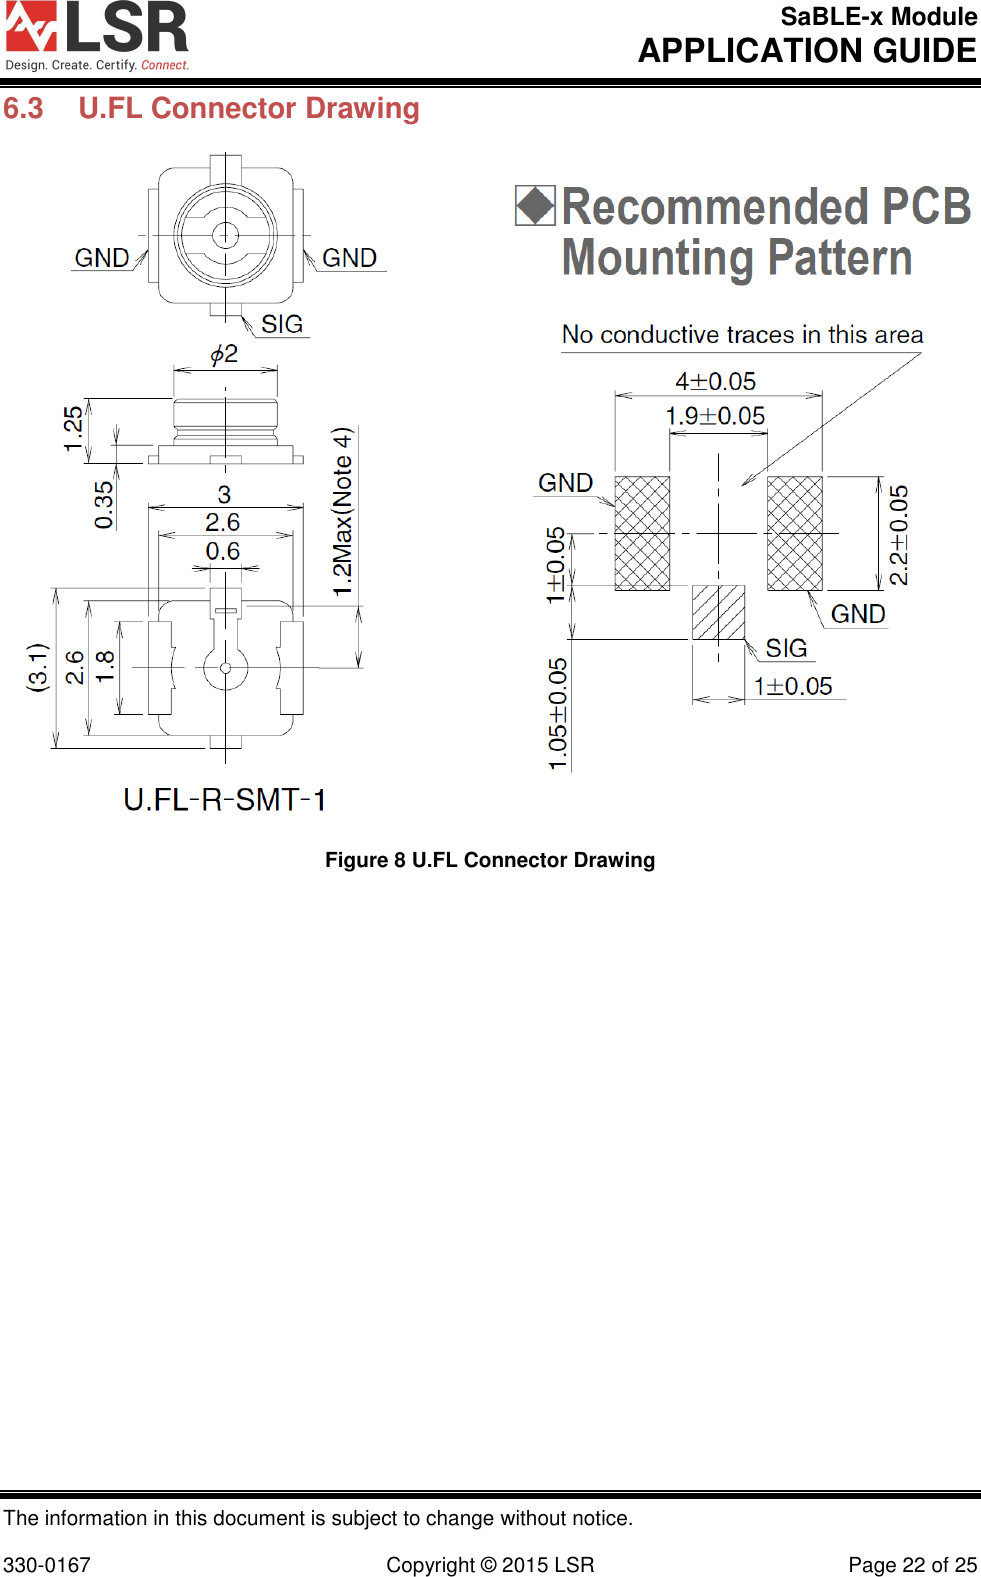 SaBLE-x Module       APPLICATION GUIDE  The information in this document is subject to change without notice.  330-0167  Copyright © 2015 LSR  Page 22 of 25 6.3  U.FL Connector Drawing  Figure 8 U.FL Connector Drawing 